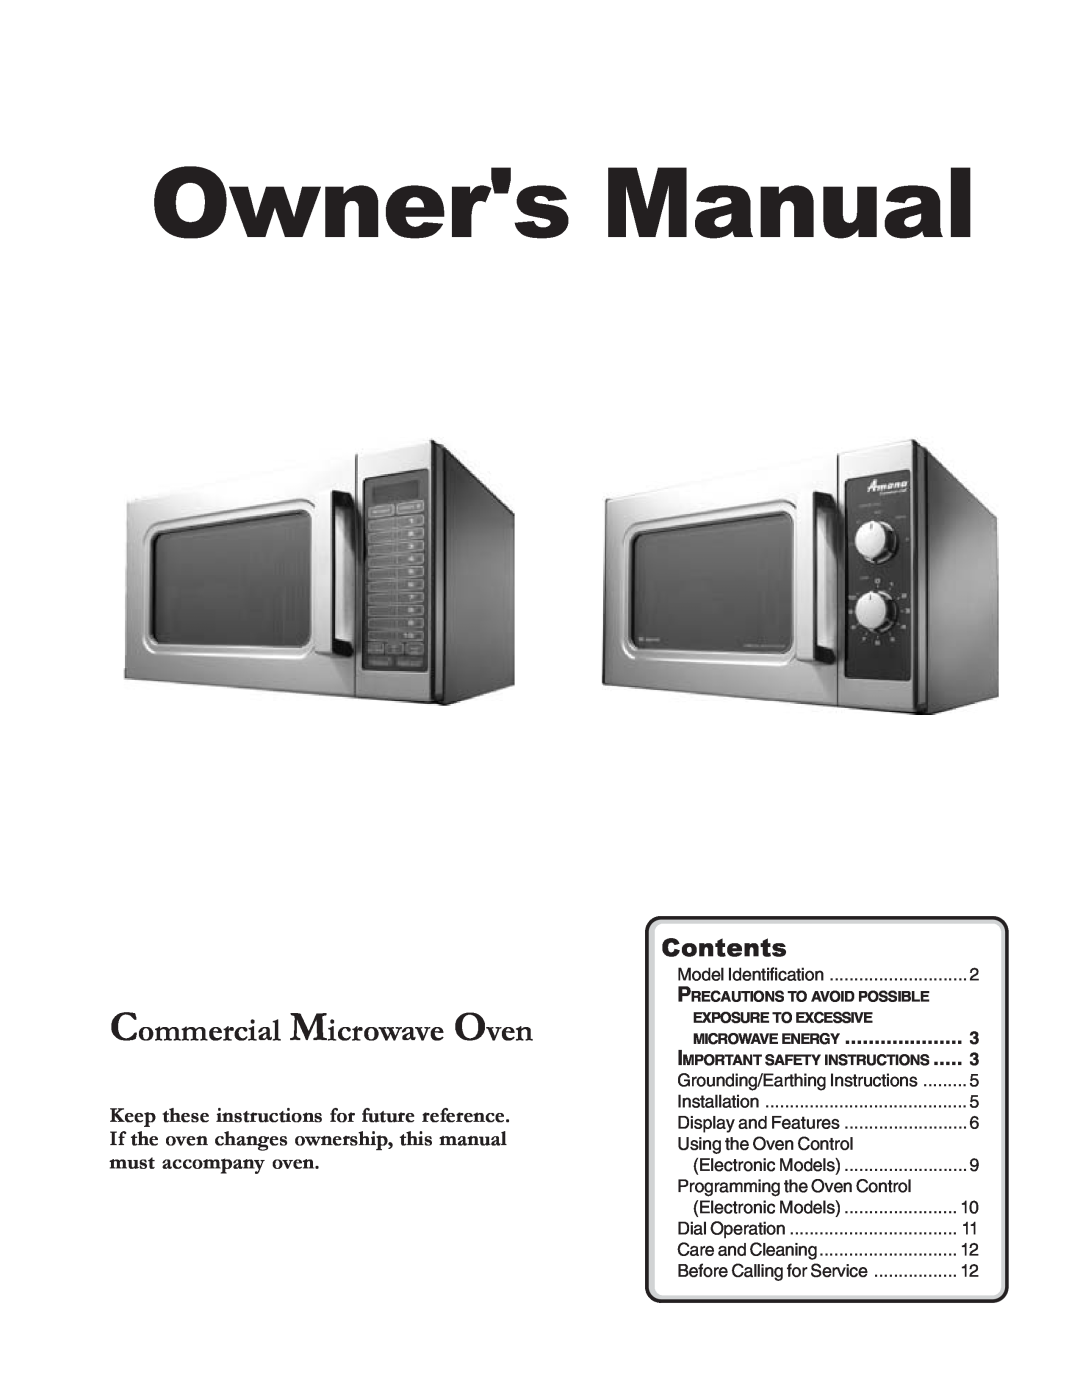 Amana Commercial Microwave Oven owner manual Contents, Microwave Energy, Precautions To Avoid Possible 